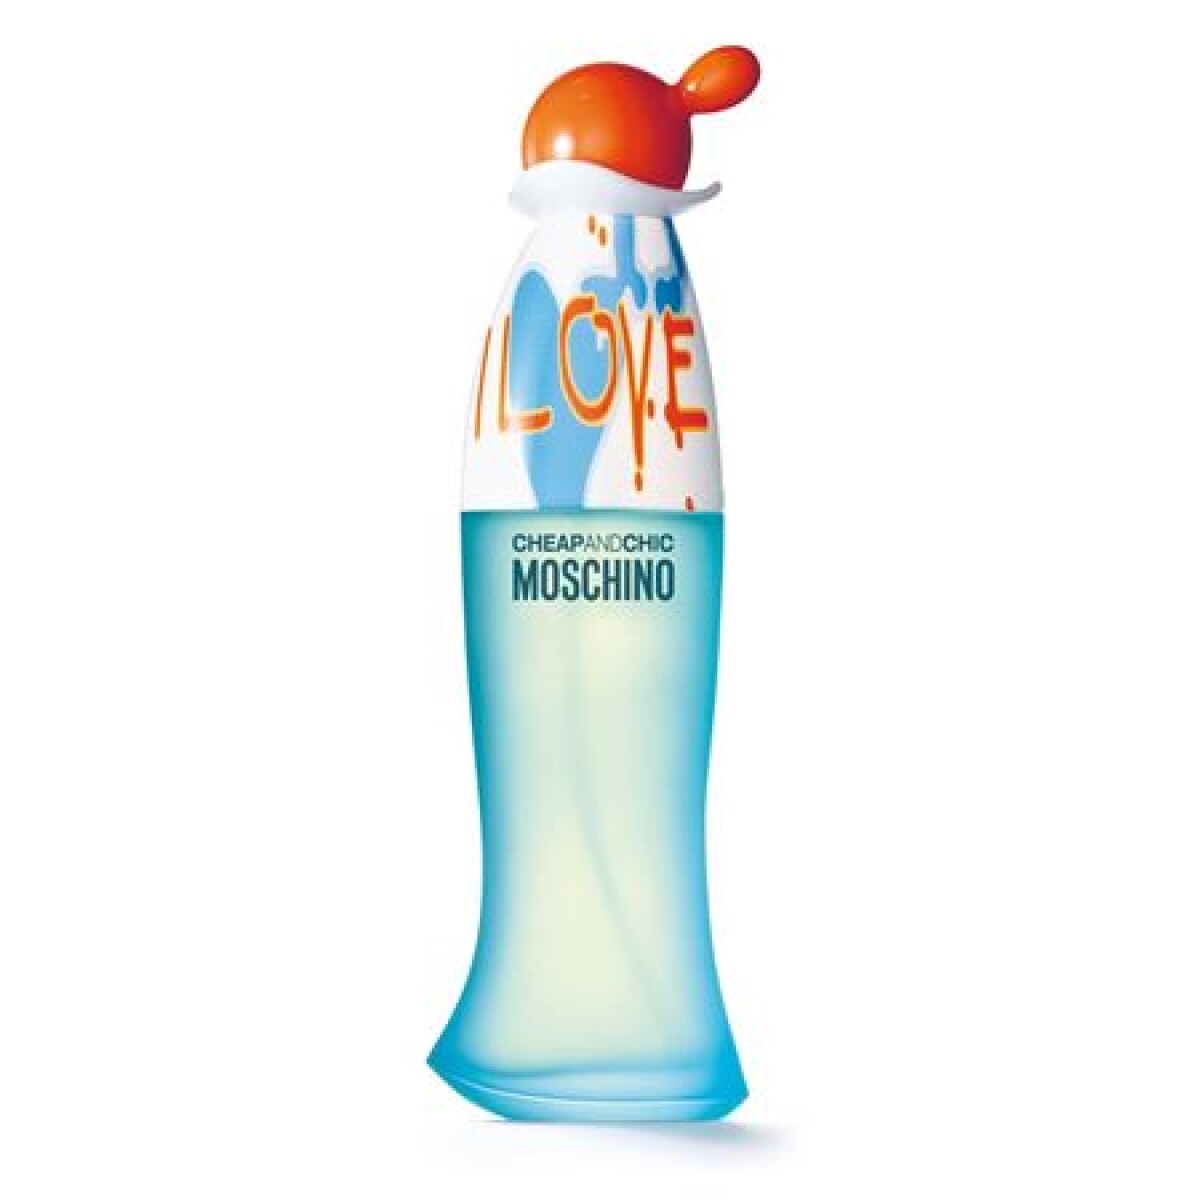 Moschino Cheap and Chic Love edt - 100 ml 